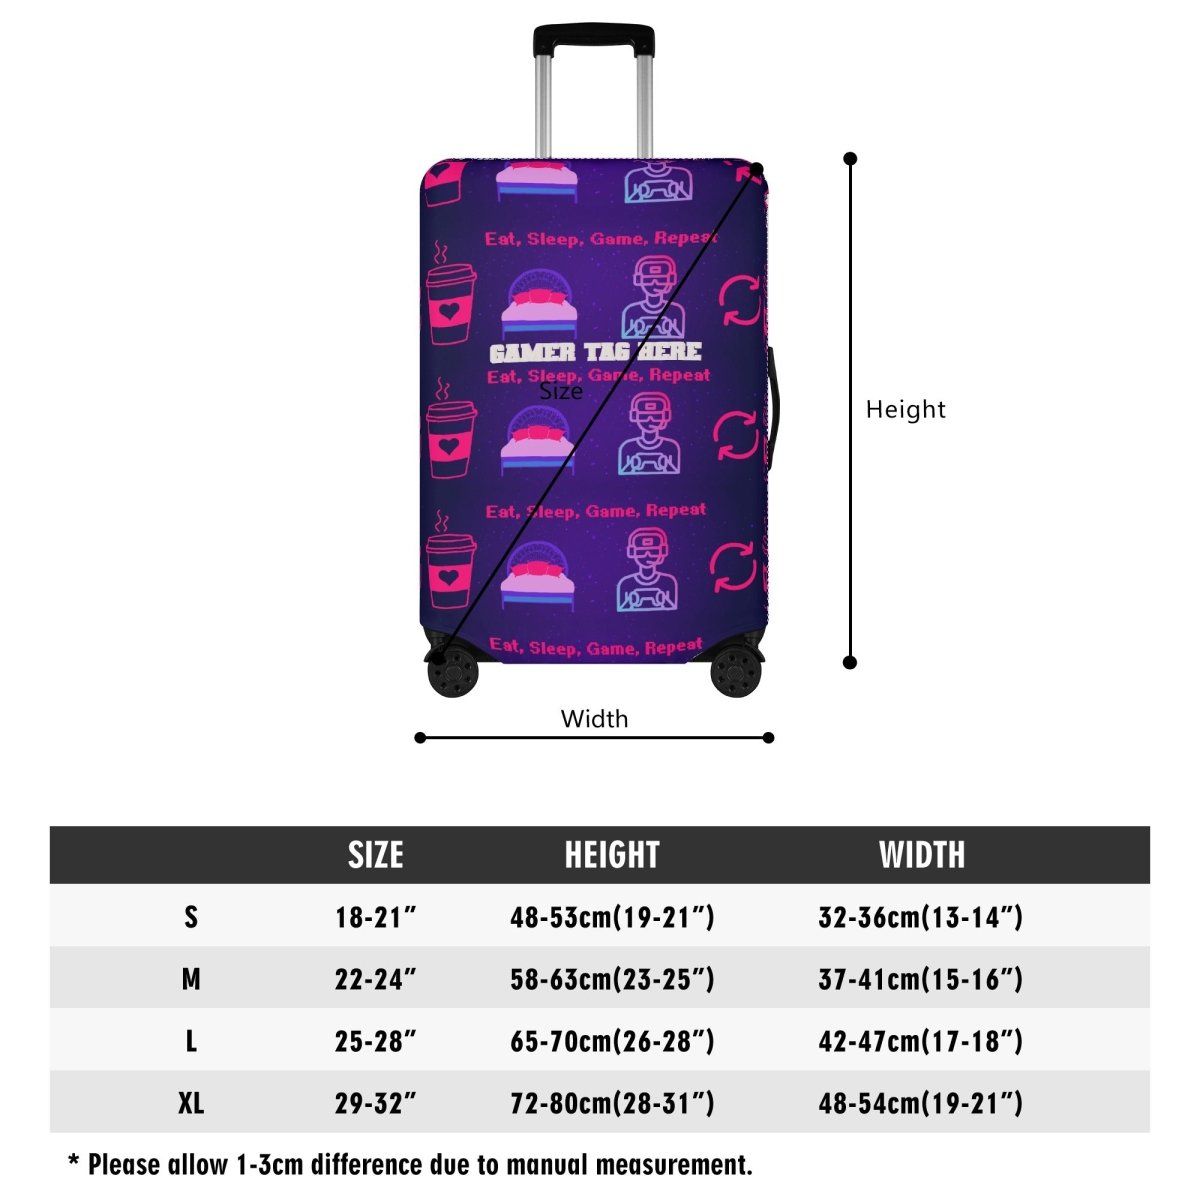 Game On Travel Personalized Luggage Cover - Iron Phoenix GHG